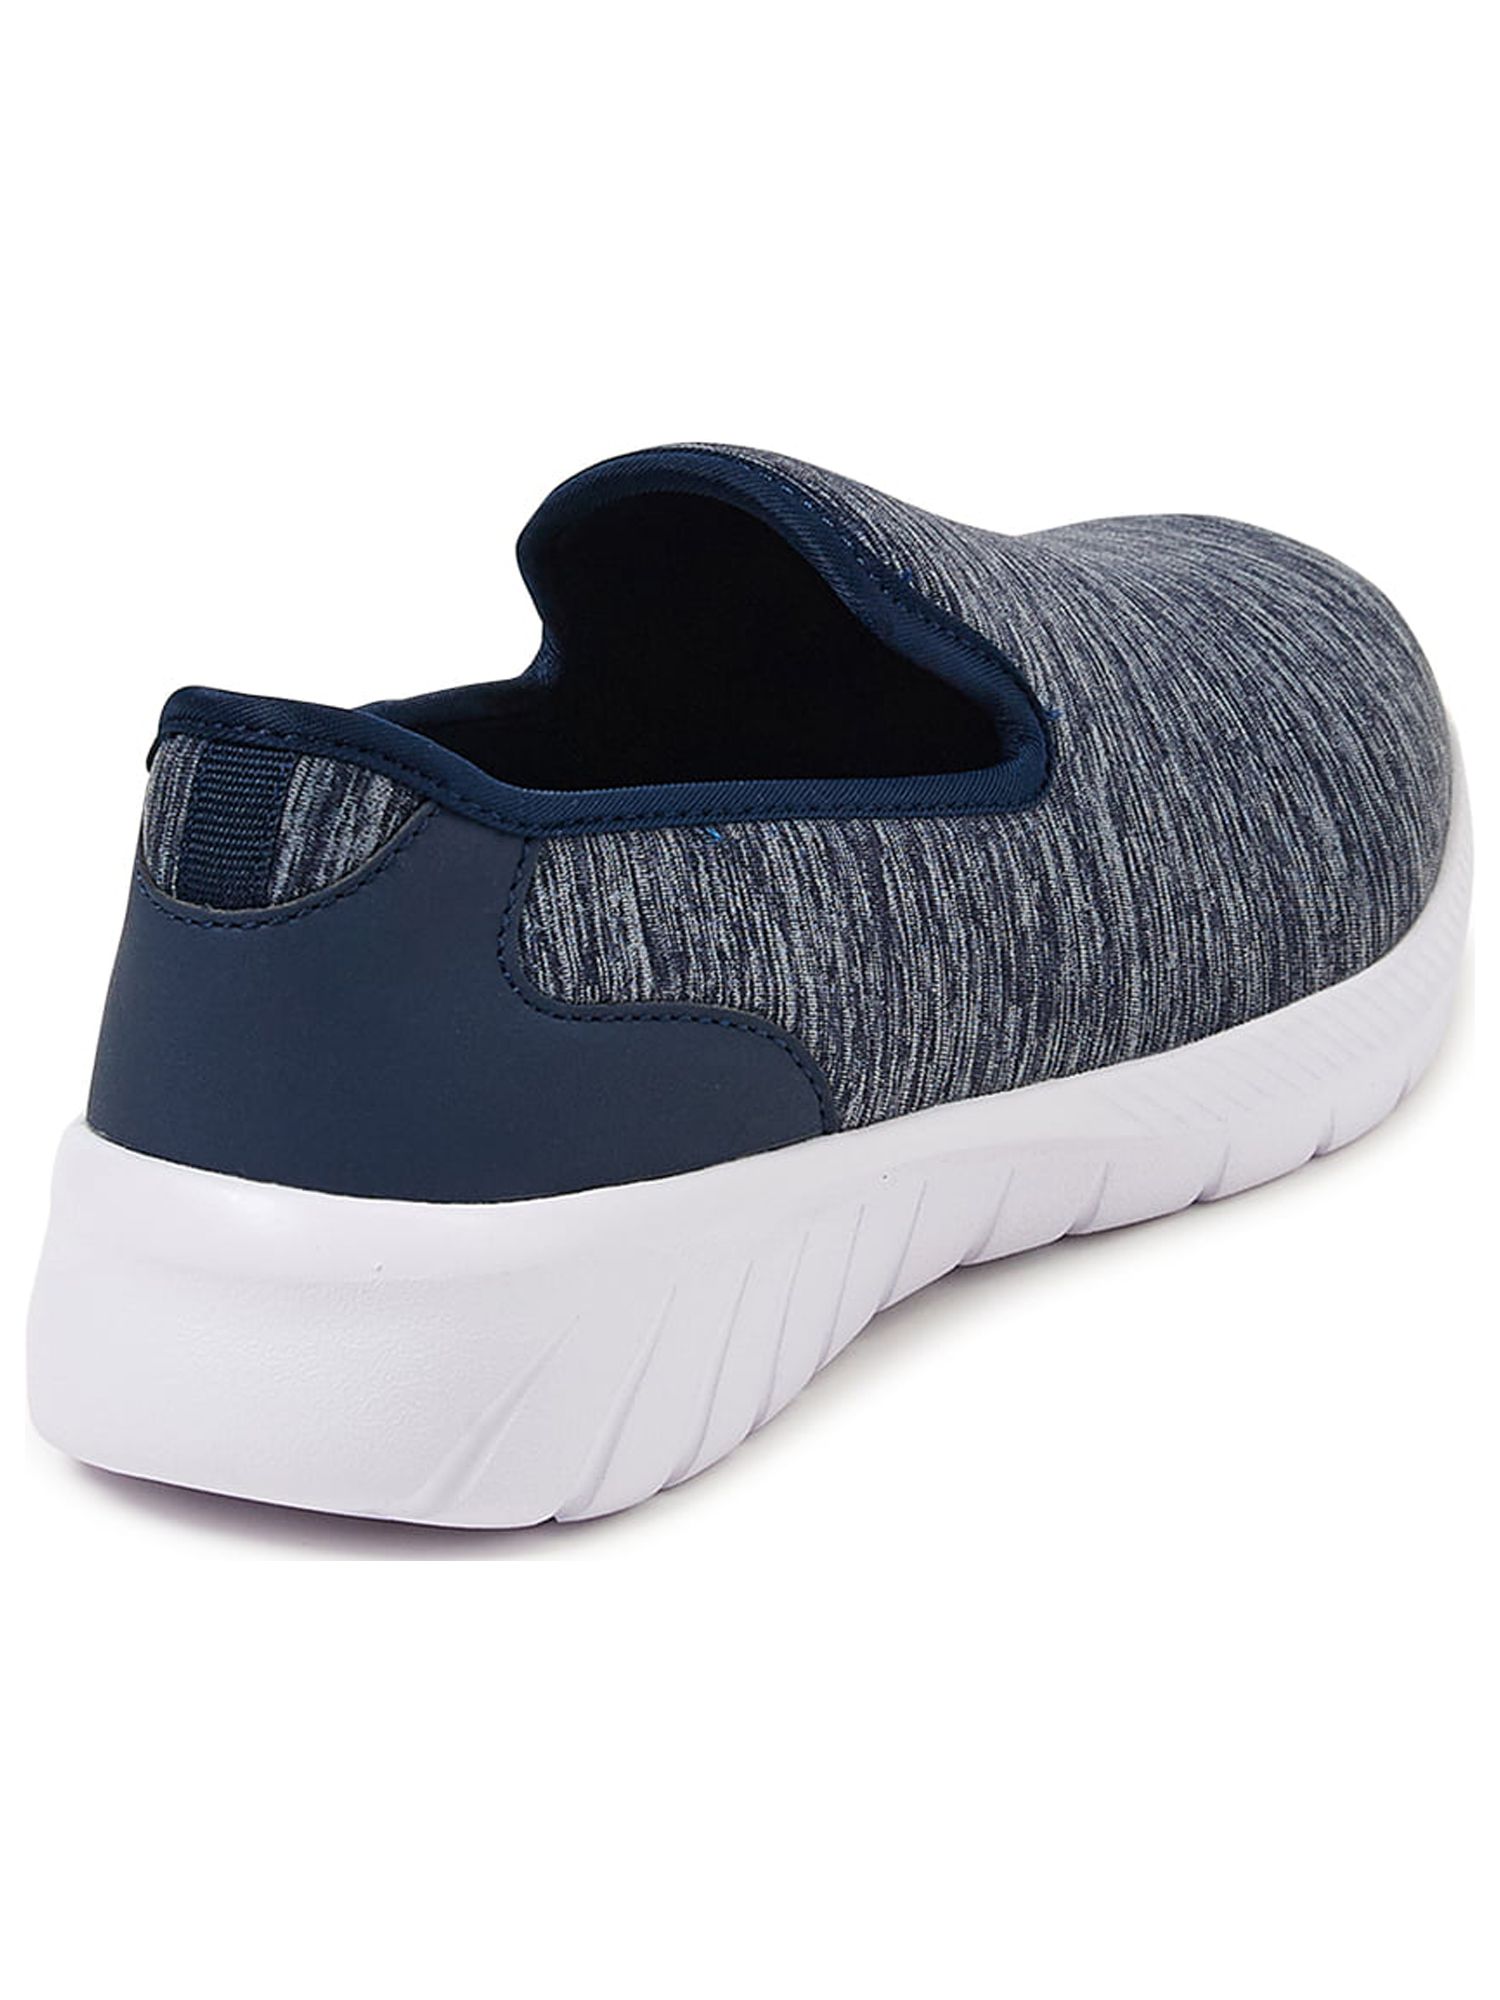 Athletic Works Women's Slip-On Sneakers (Wide Width Available) - image 3 of 6